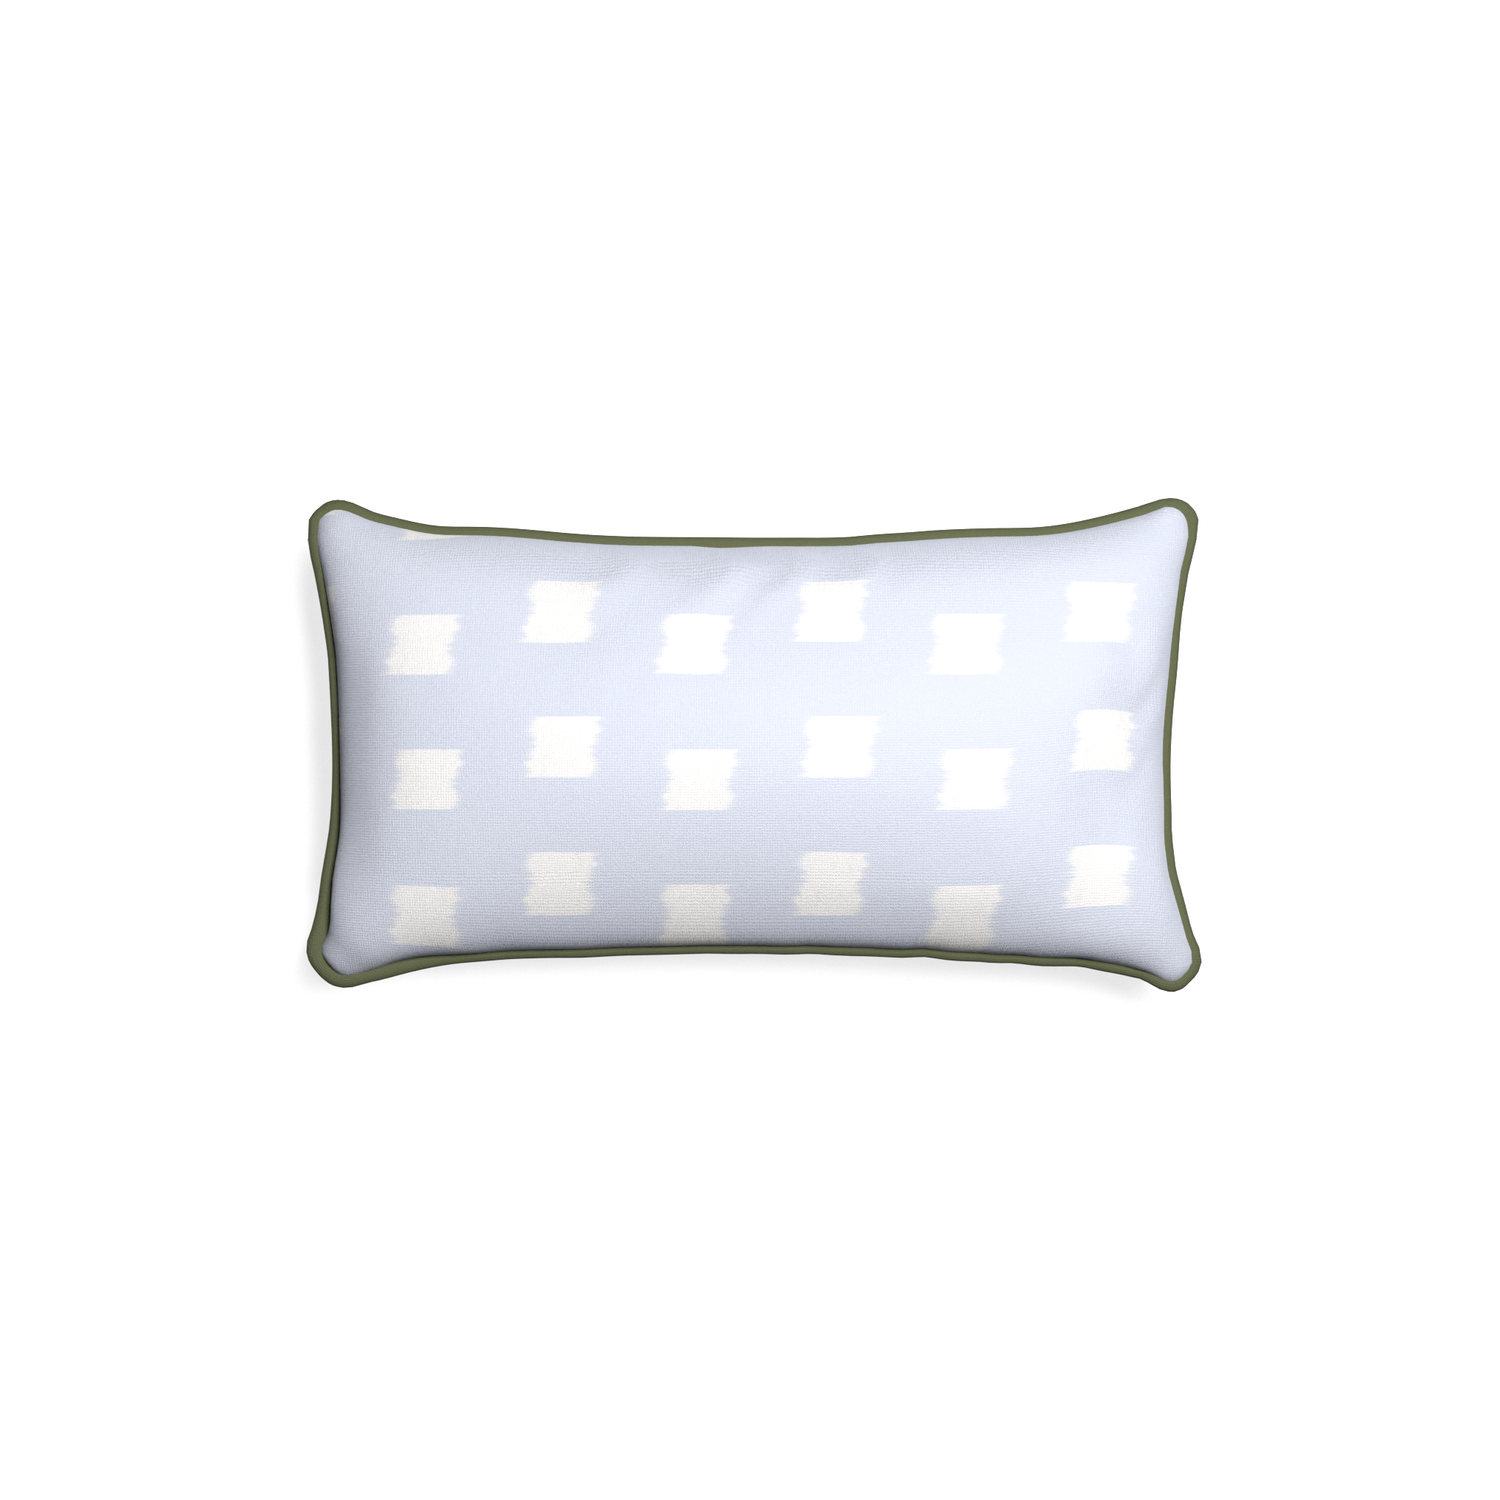 Petite-lumbar denton custom sky blue patternpillow with f piping on white background